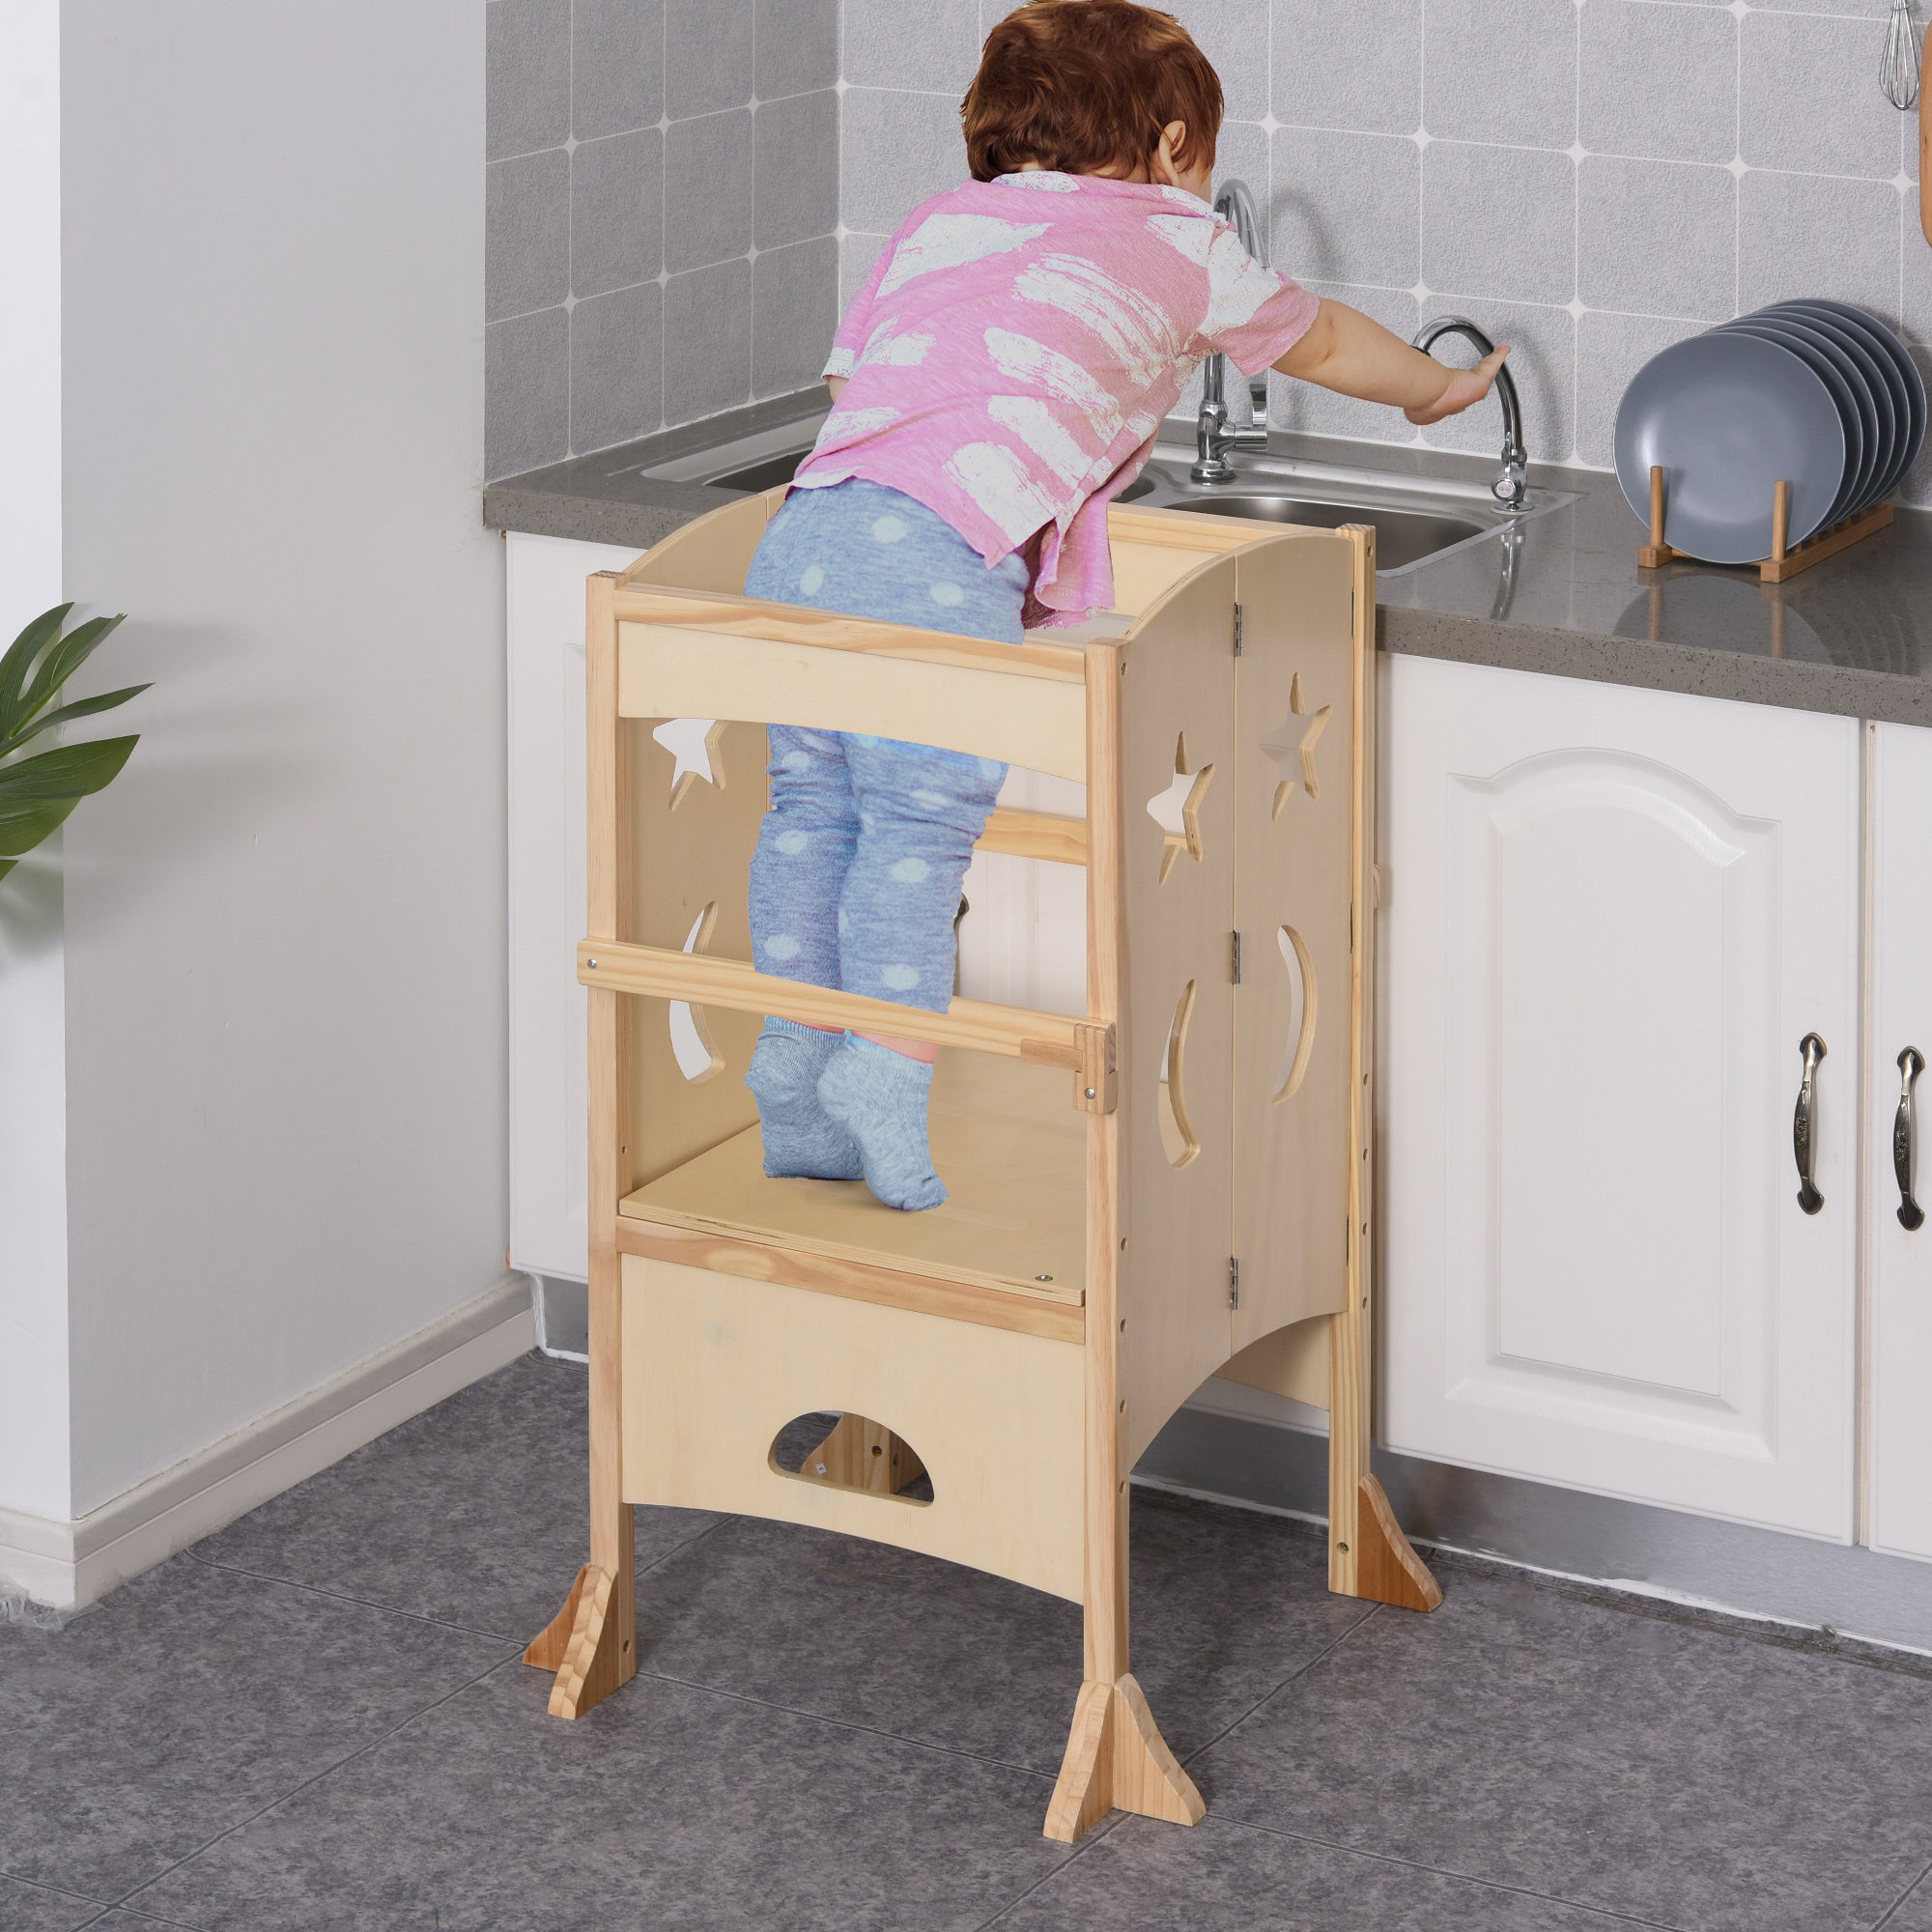 Wooden Kitchen Step Stool for Kids, Foldable